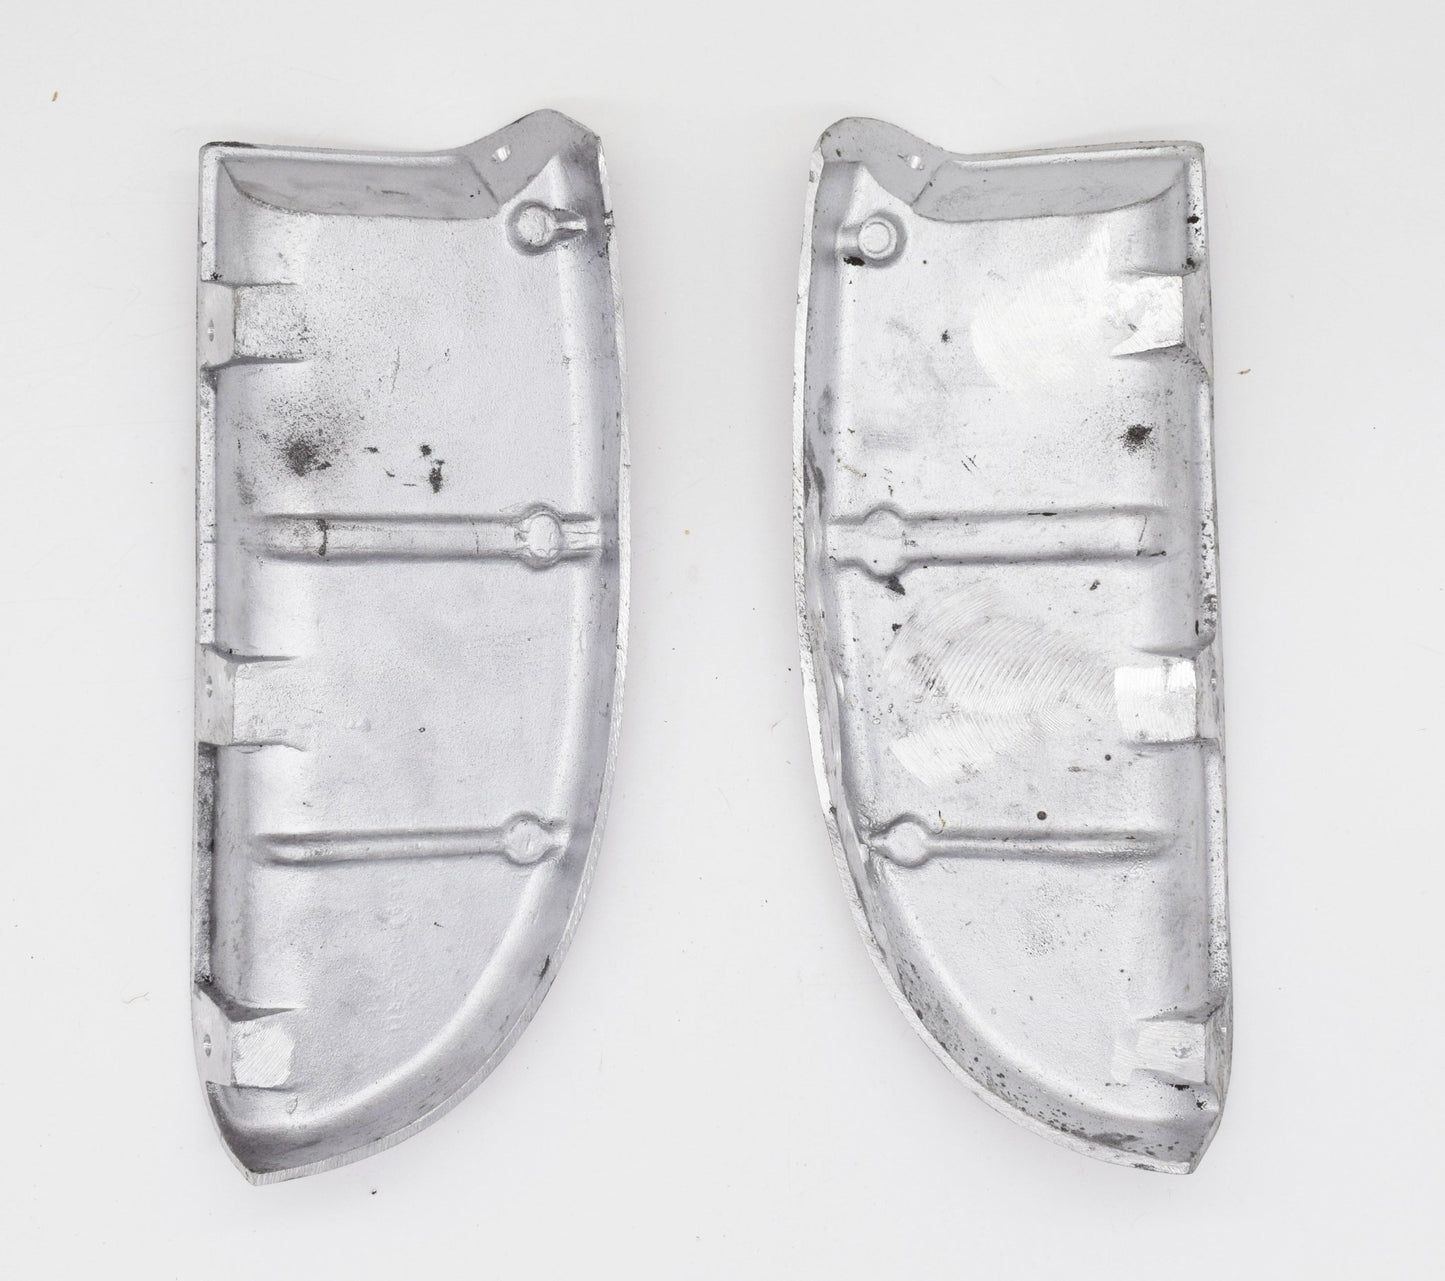 Rear Fender Lower Step Plates, 1948-1951 Willys Jeepster - The JeepsterMan